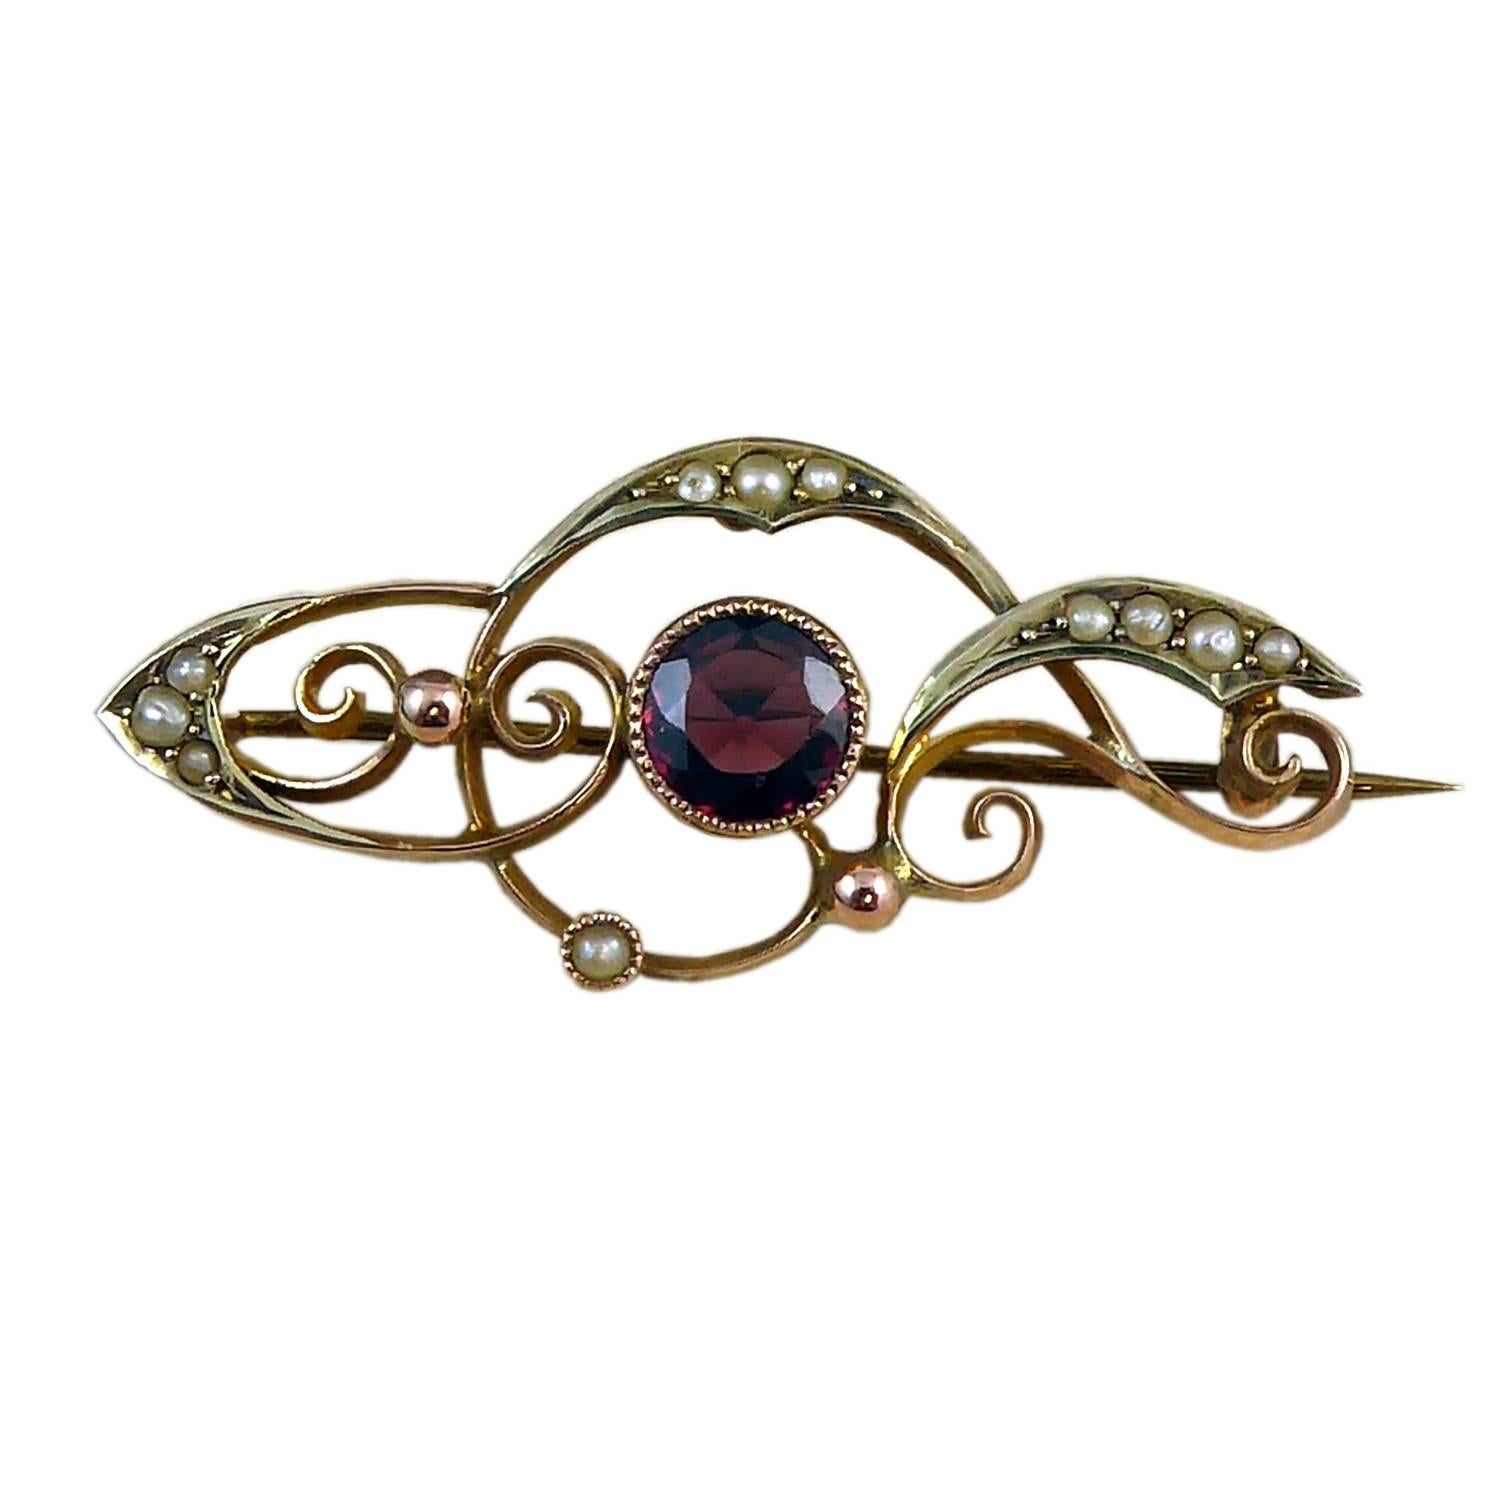 Antique Art Nouveau Gold Pin, Garnet and Seed Pearls, Rose and Yellow Gold